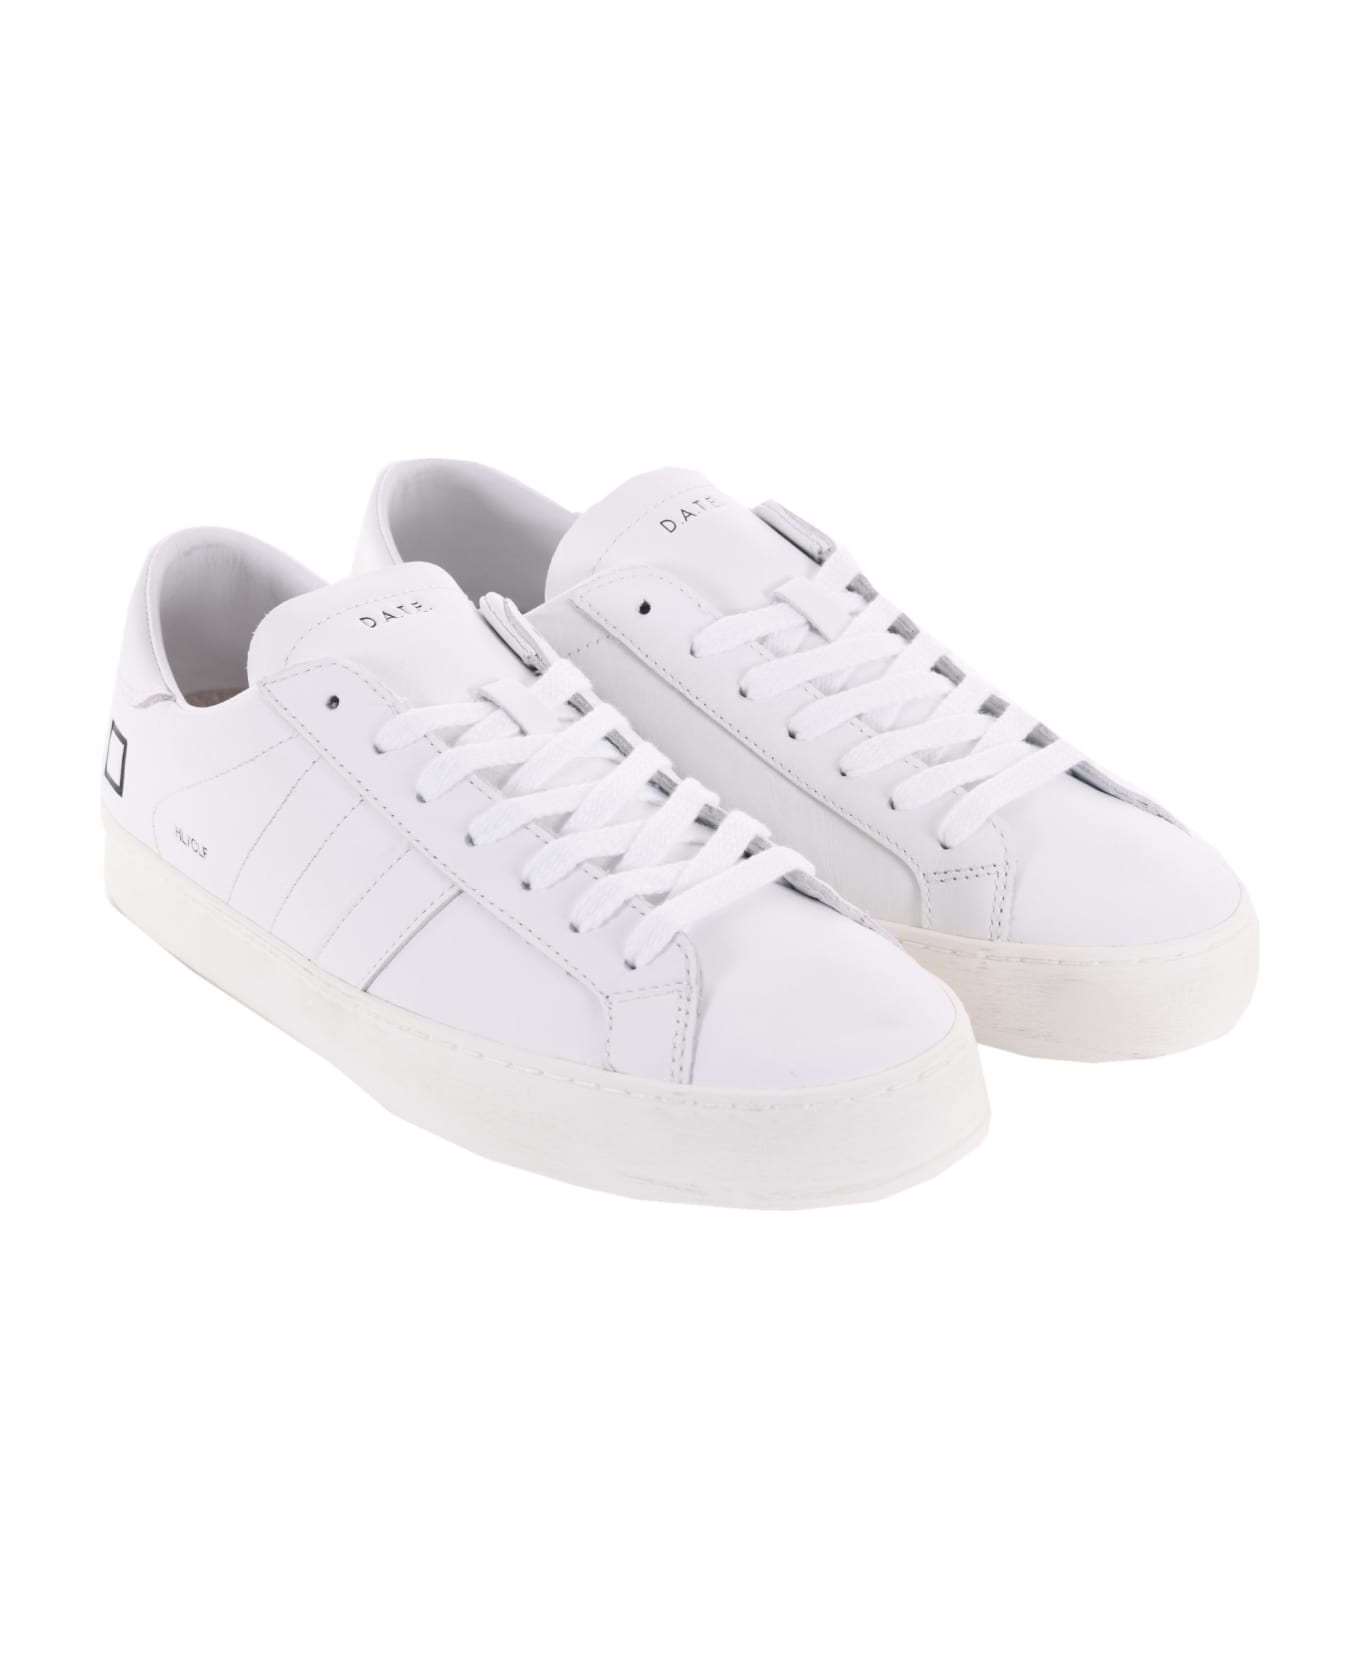 D.A.T.E. Men's Sneakers In Leather - Bianco